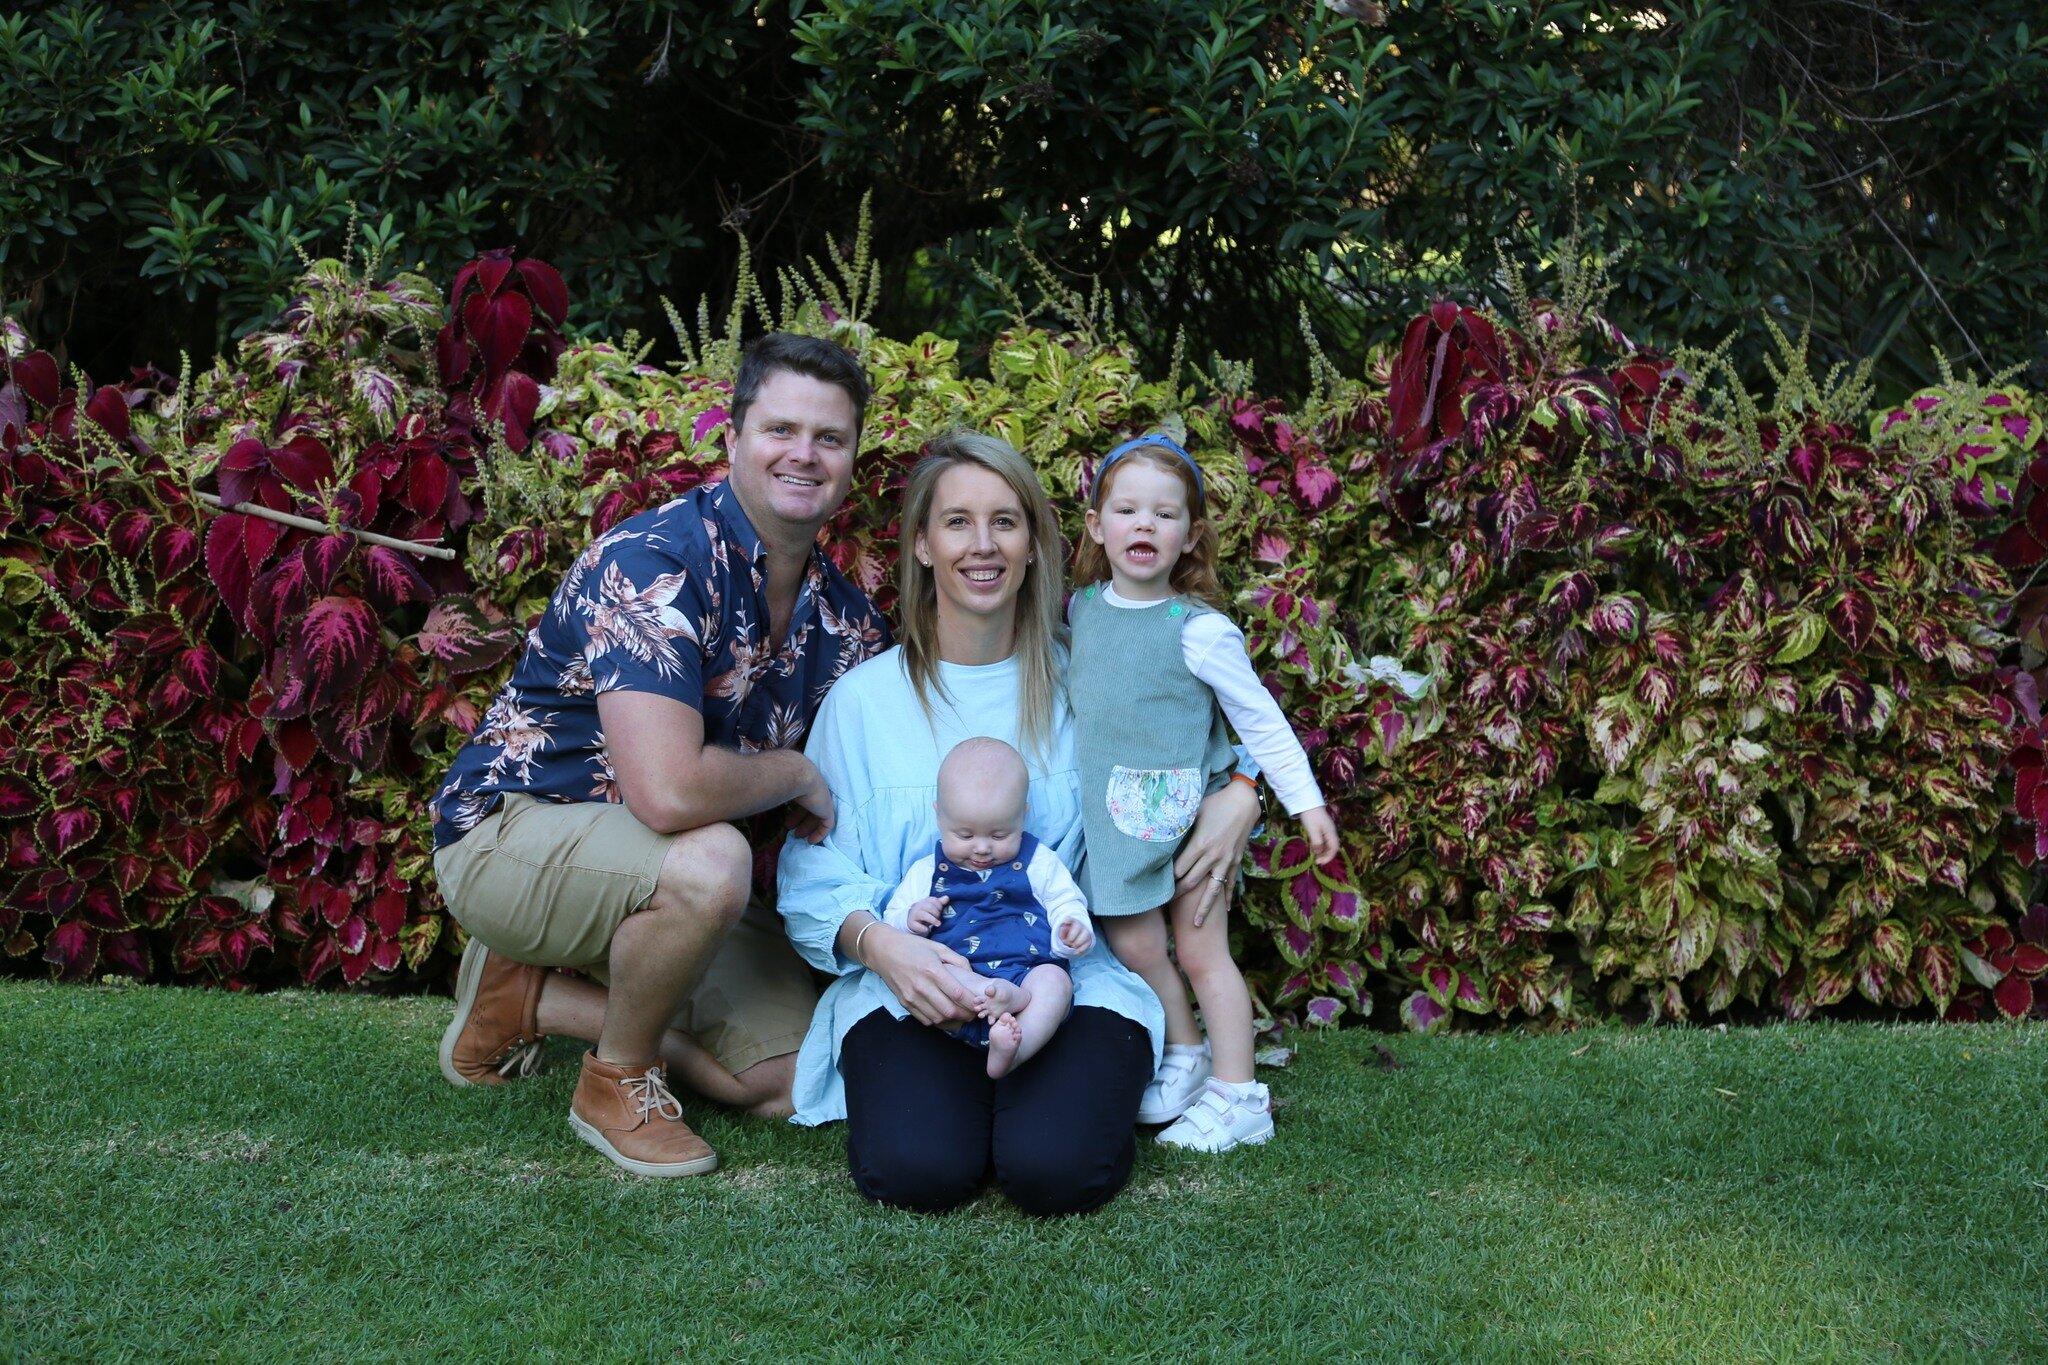 BIG ANNOUNCEMENT!
I am so thankful and excited to share the news that Little Bobbin Lives on and has a beautiful new creative at the helm.
Meet Lauren, her husband Ryan and her gorgeous kids, Roland and Holly.
It has been a pleasure for me to share a